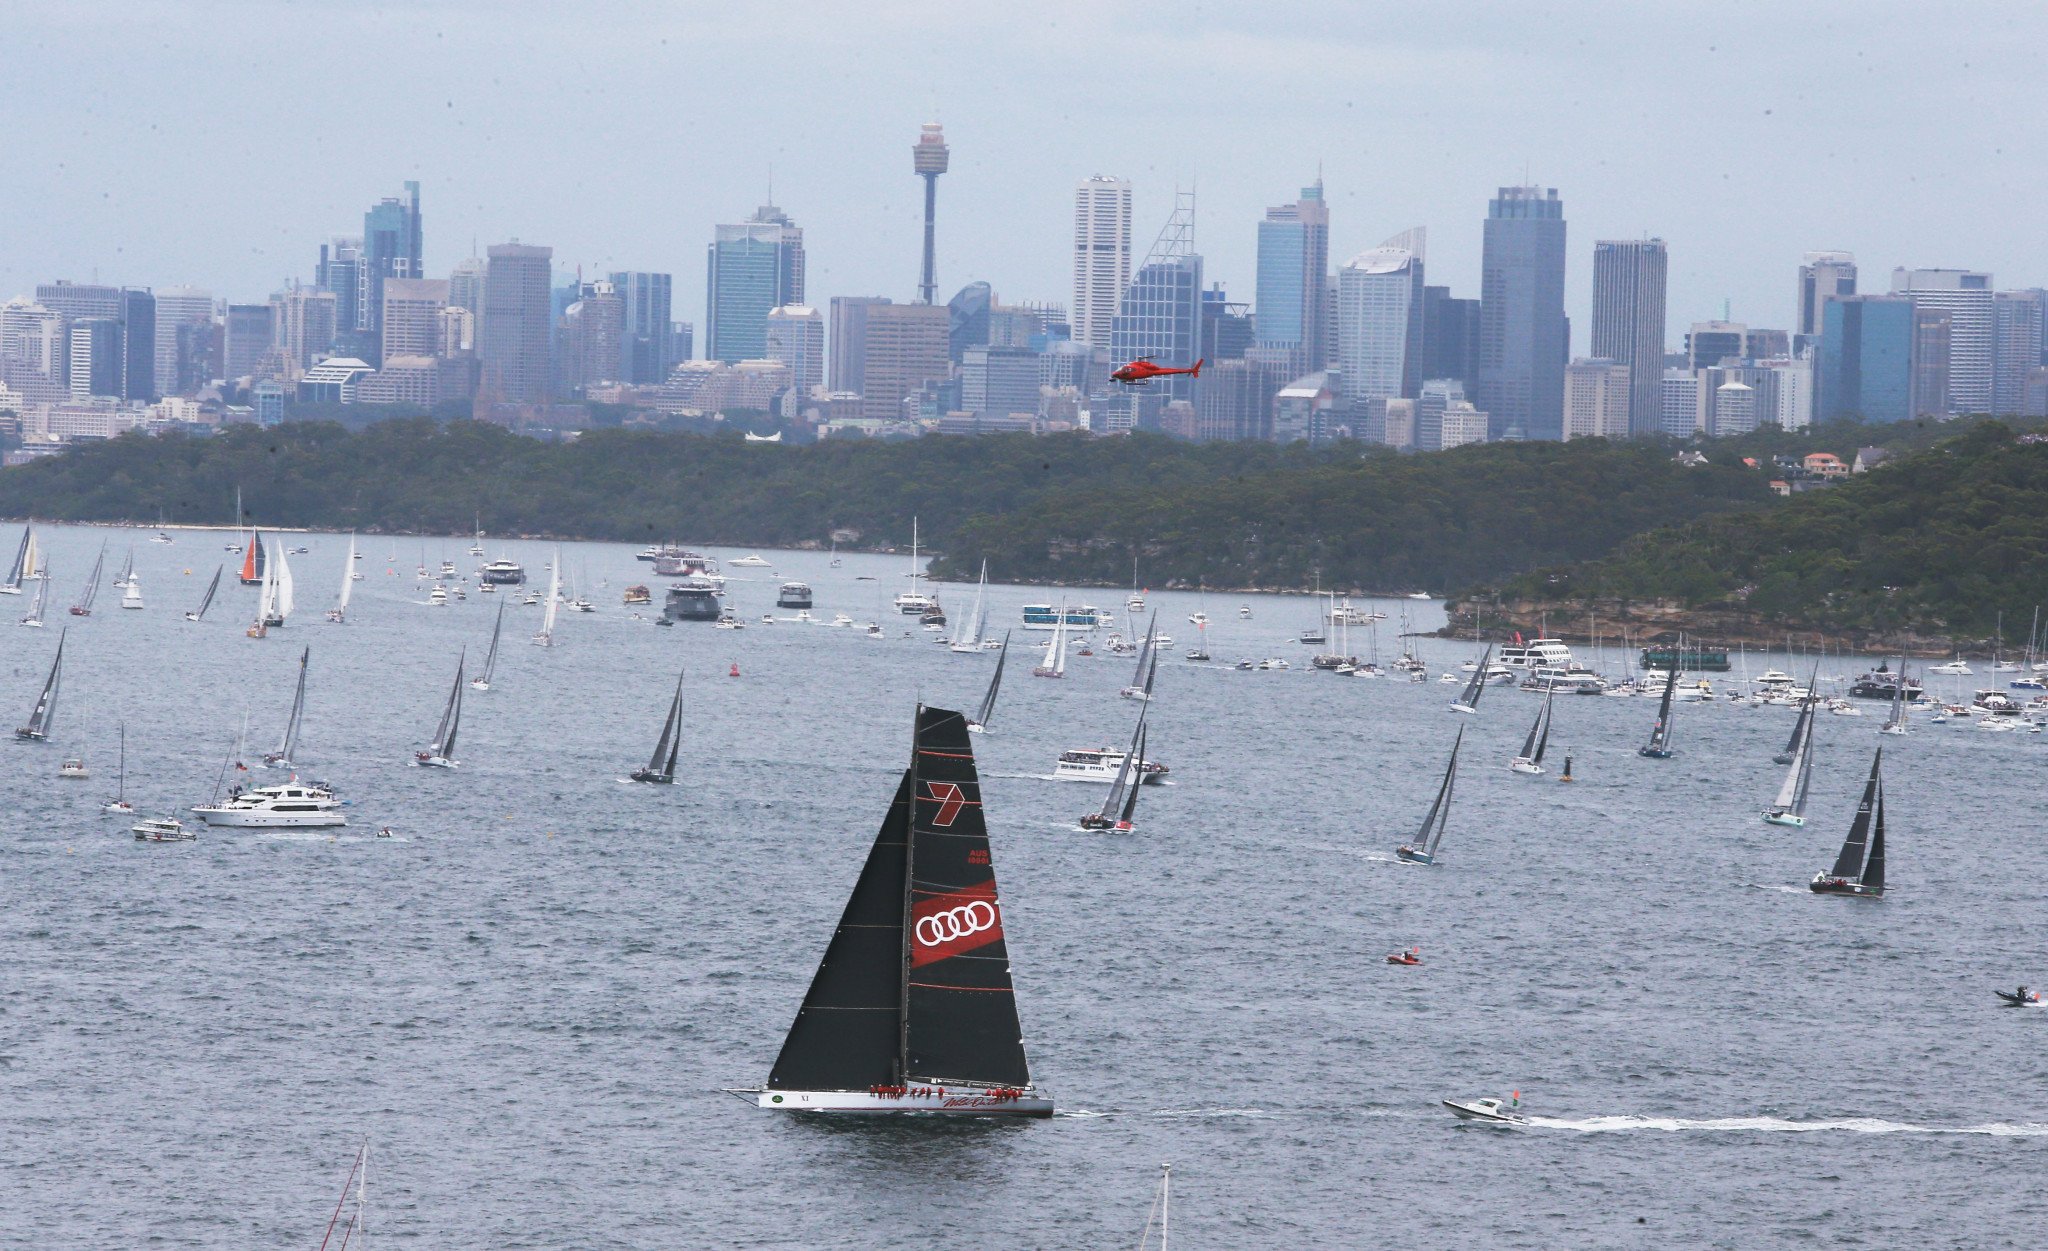 Sydney Hobart Yacht Race cancelled for 2020 due to COVID-19 pandemic